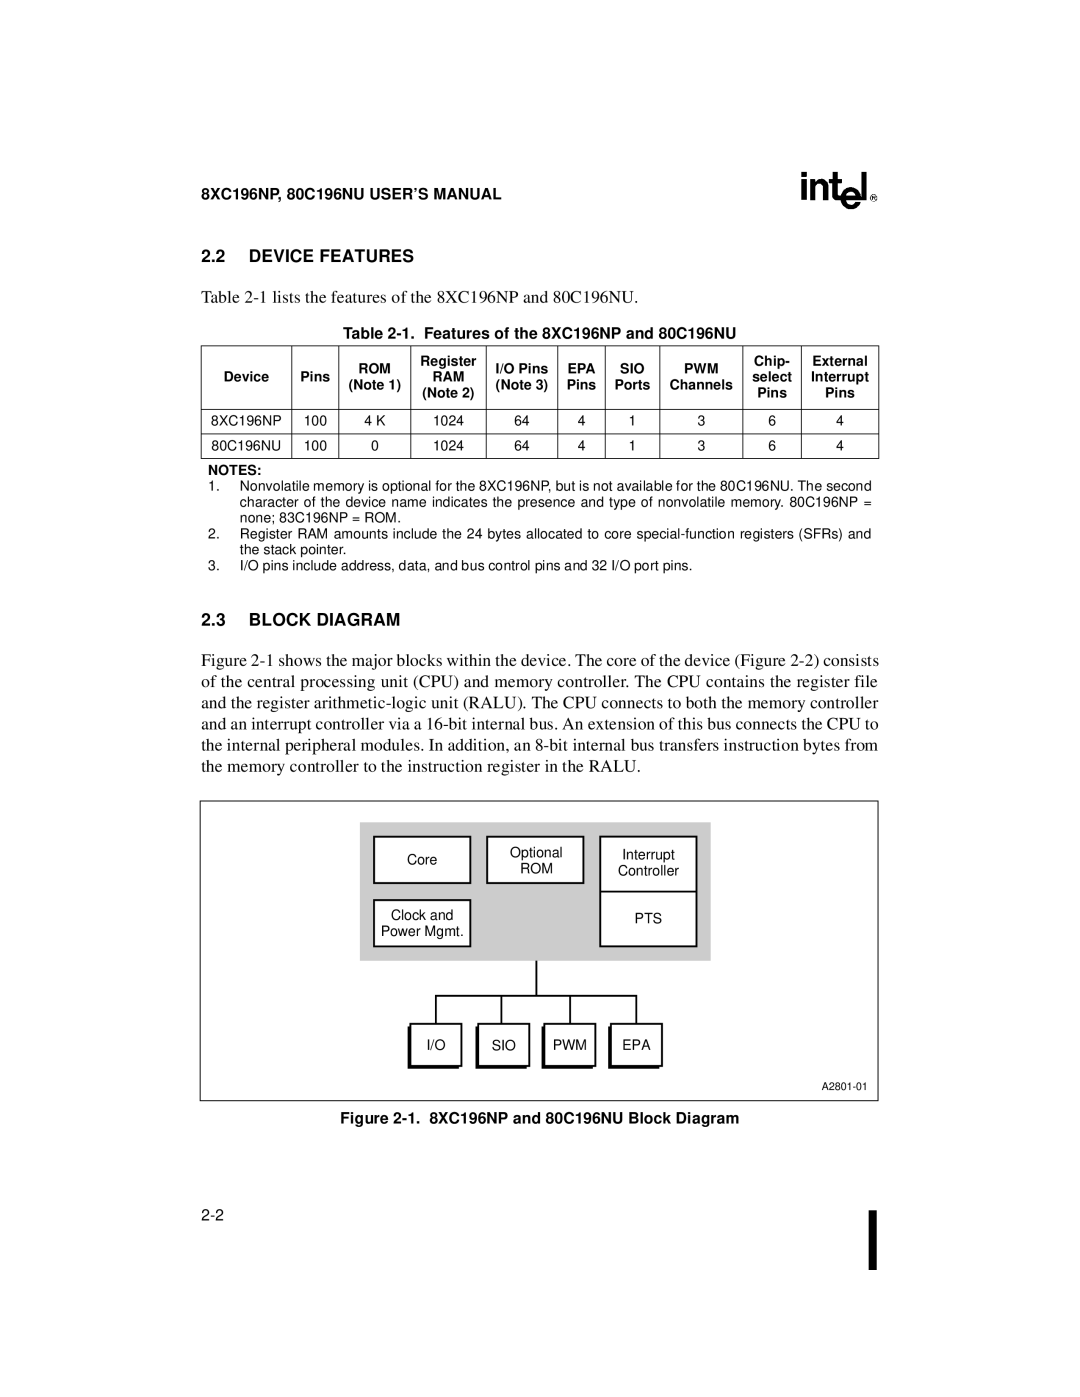 Intel Microcontroller manual Device Features, Block Diagram, Features of the 8XC196NP and 80C196NU, Rom, Epa Sio Pwm 